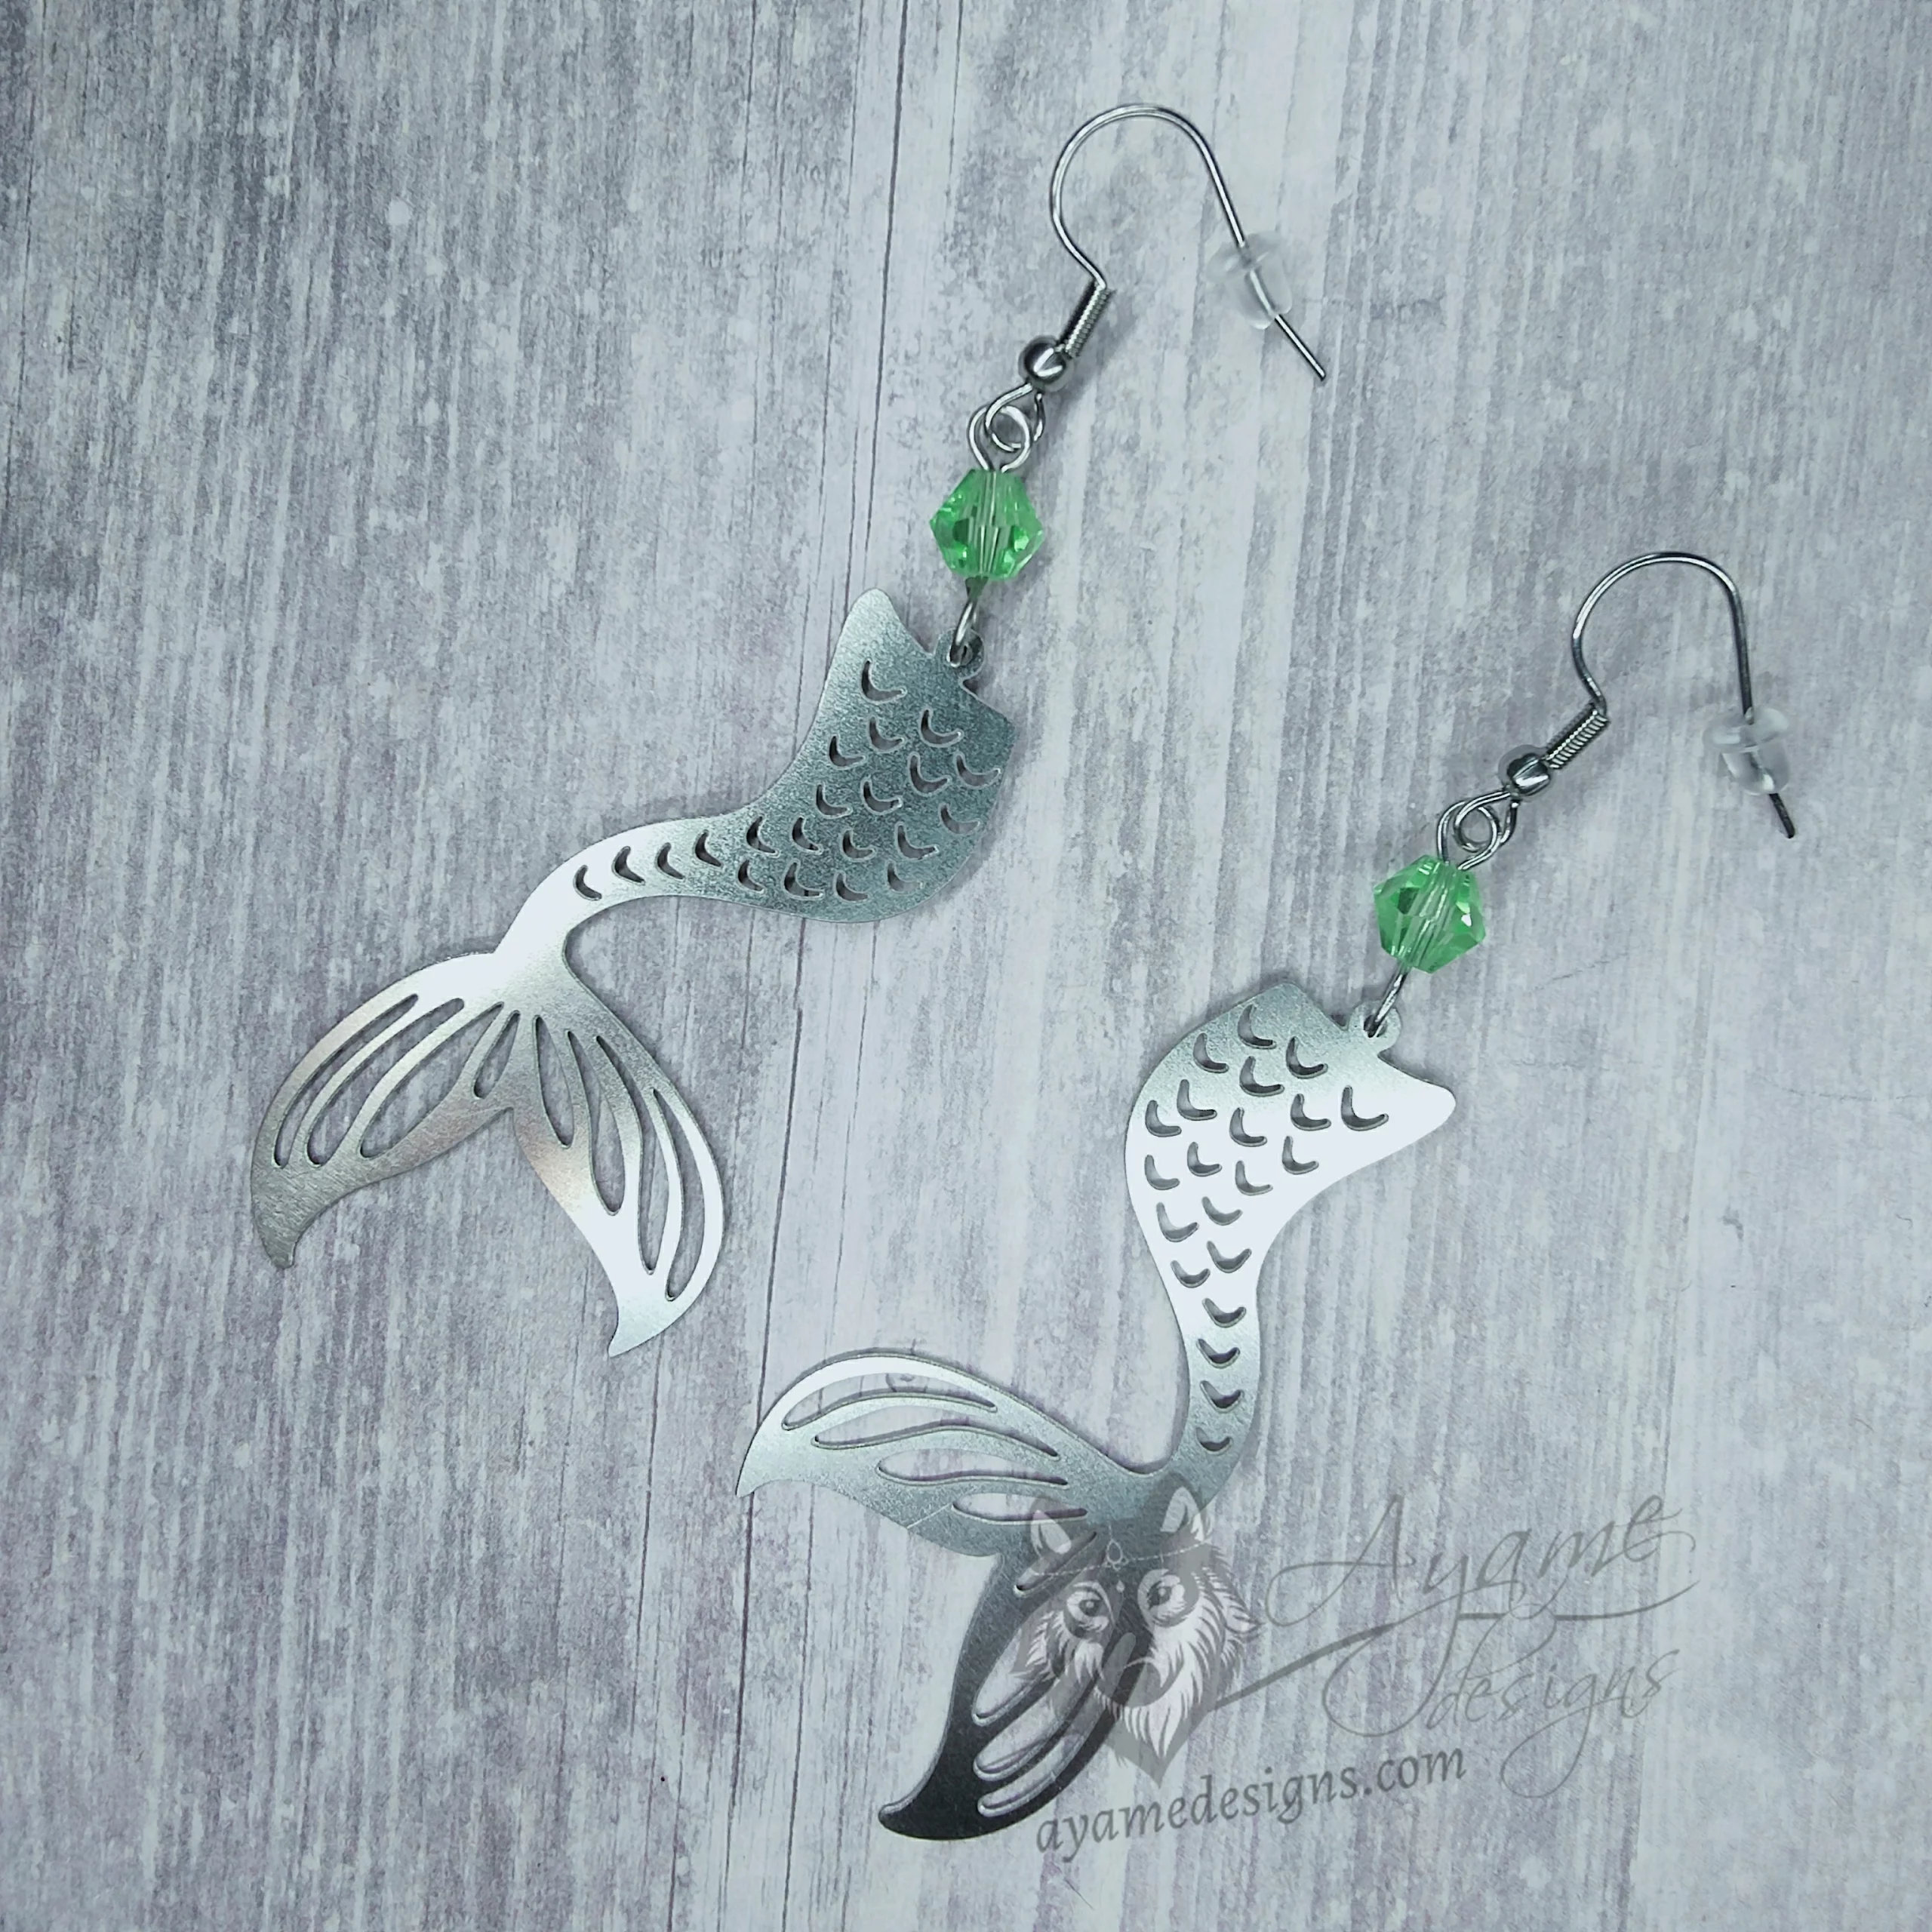 Handmade earrings with laser cut stainless steel mermaid tail charms with light green Austrian crystal beads, on stainless steel earring hooks